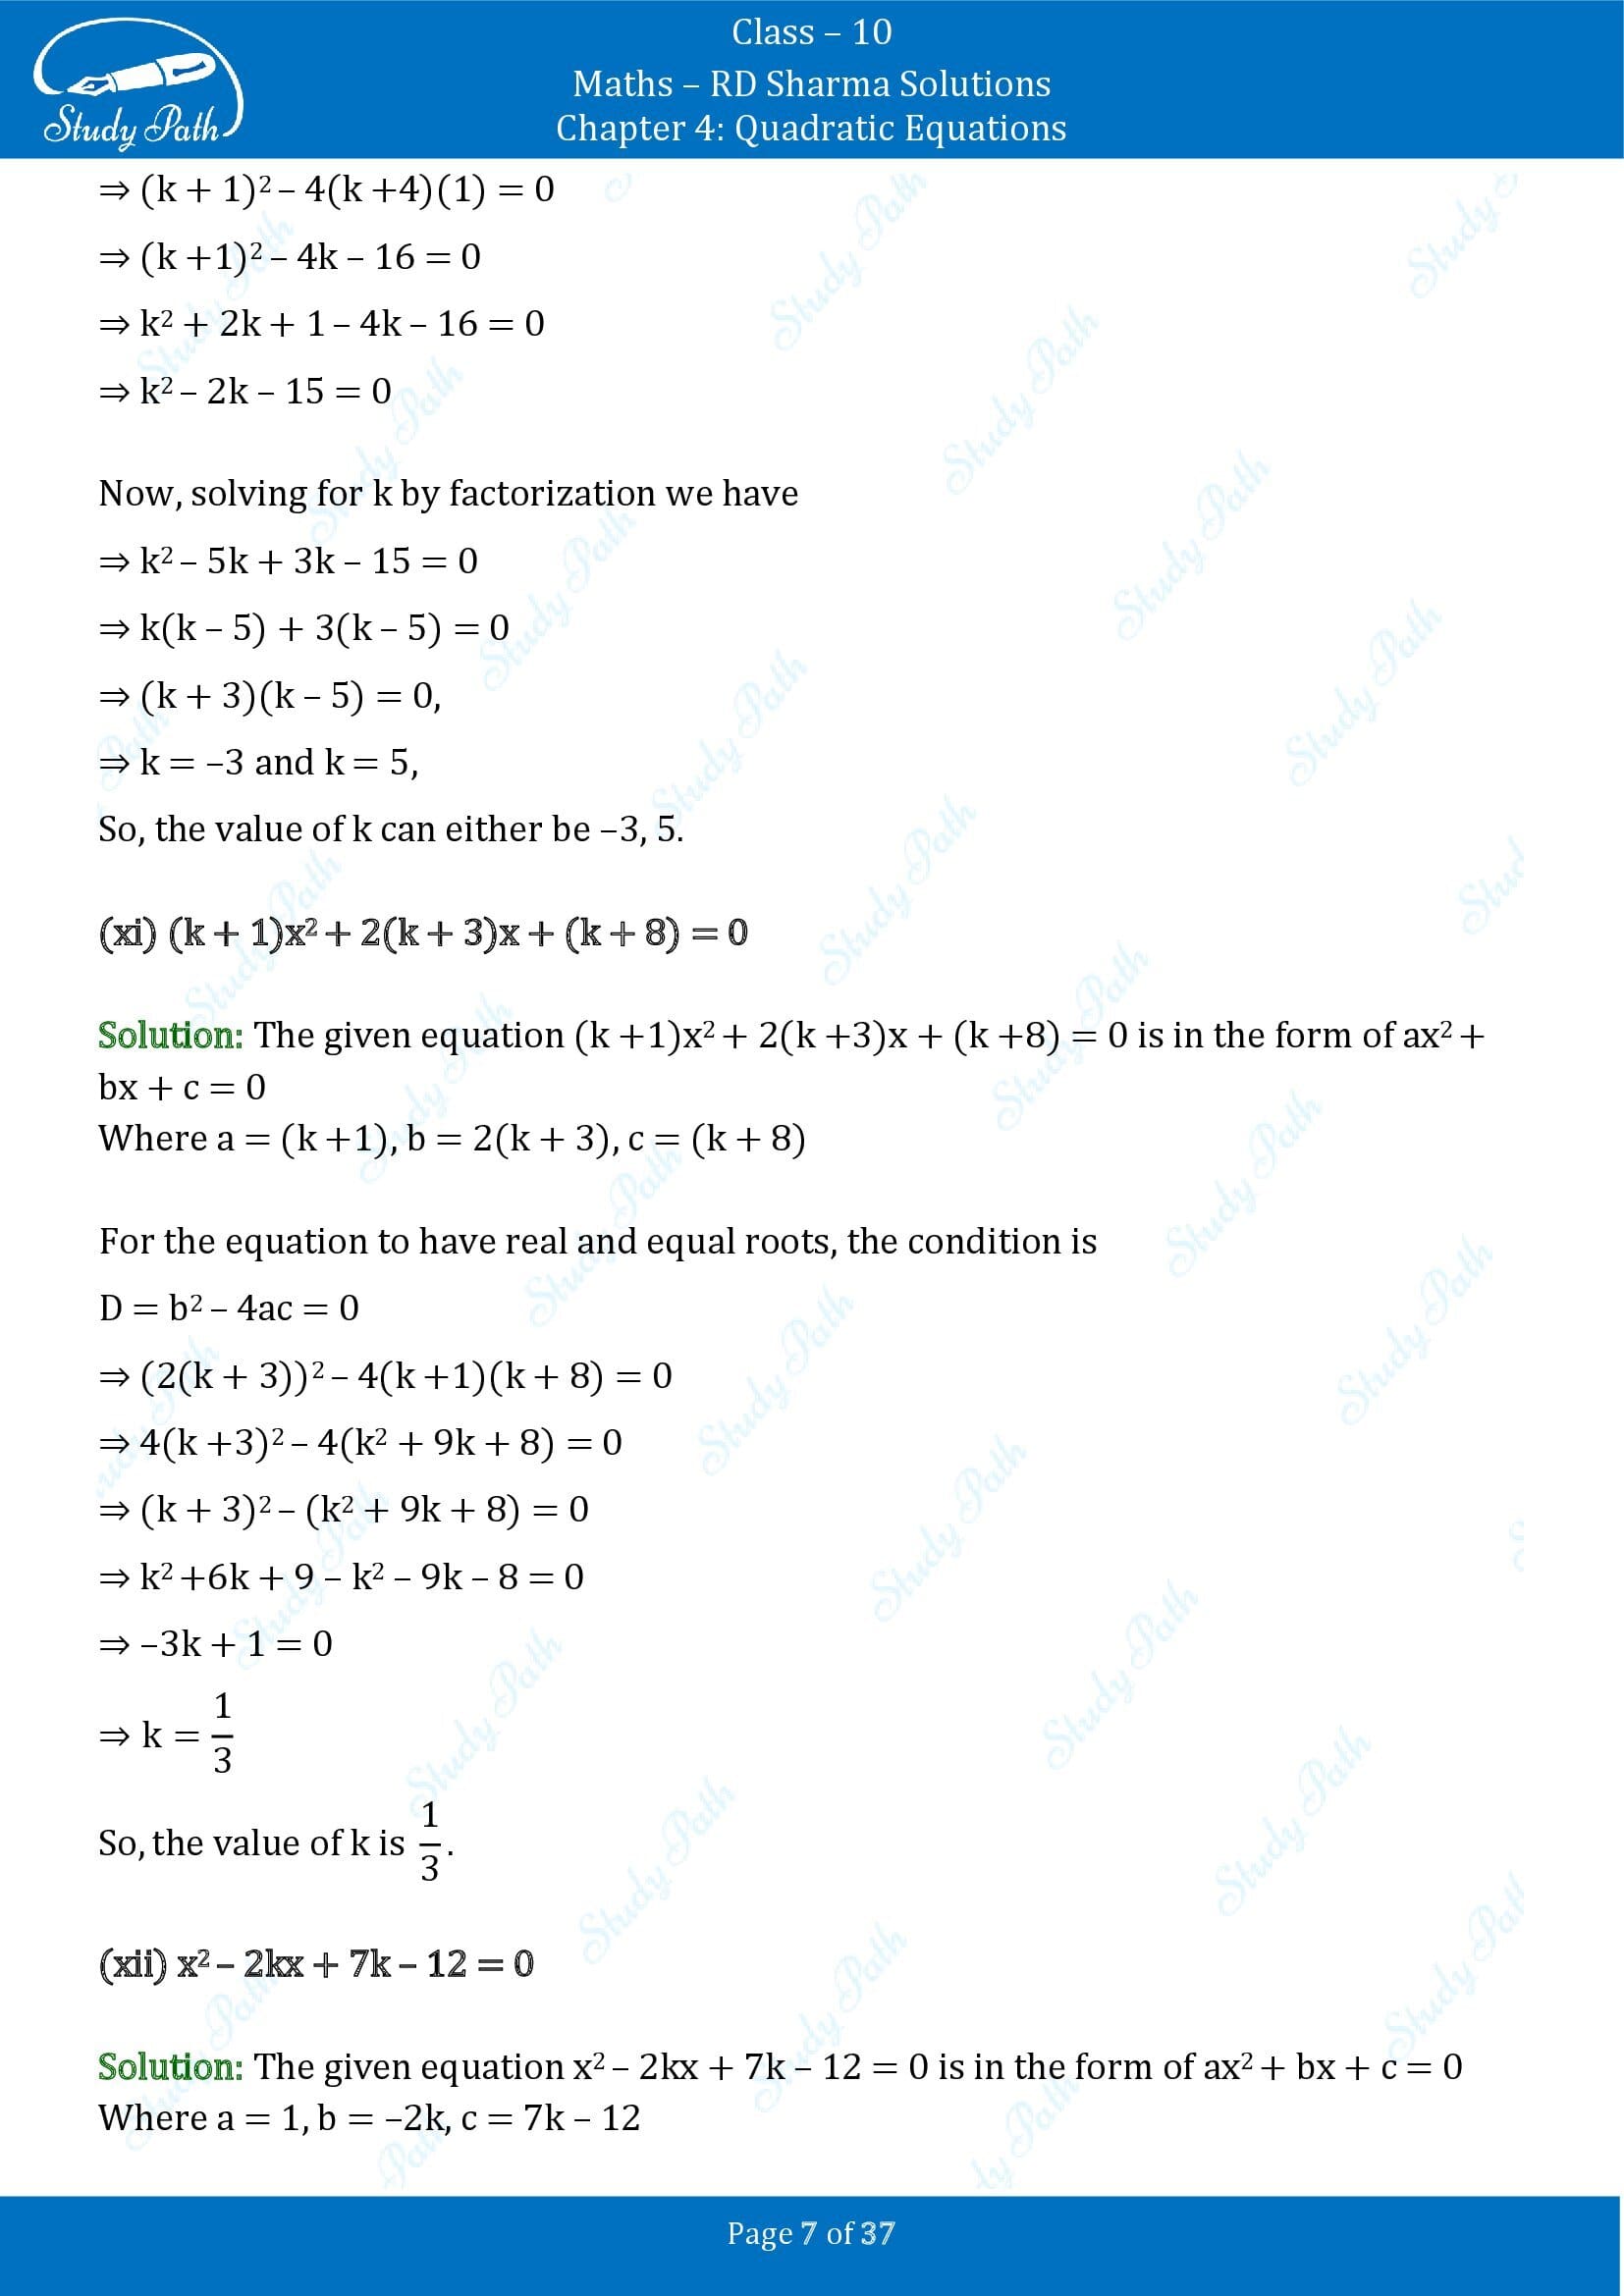 RD Sharma Solutions Class 10 Chapter 4 Quadratic Equations Exercise 4.6 00007